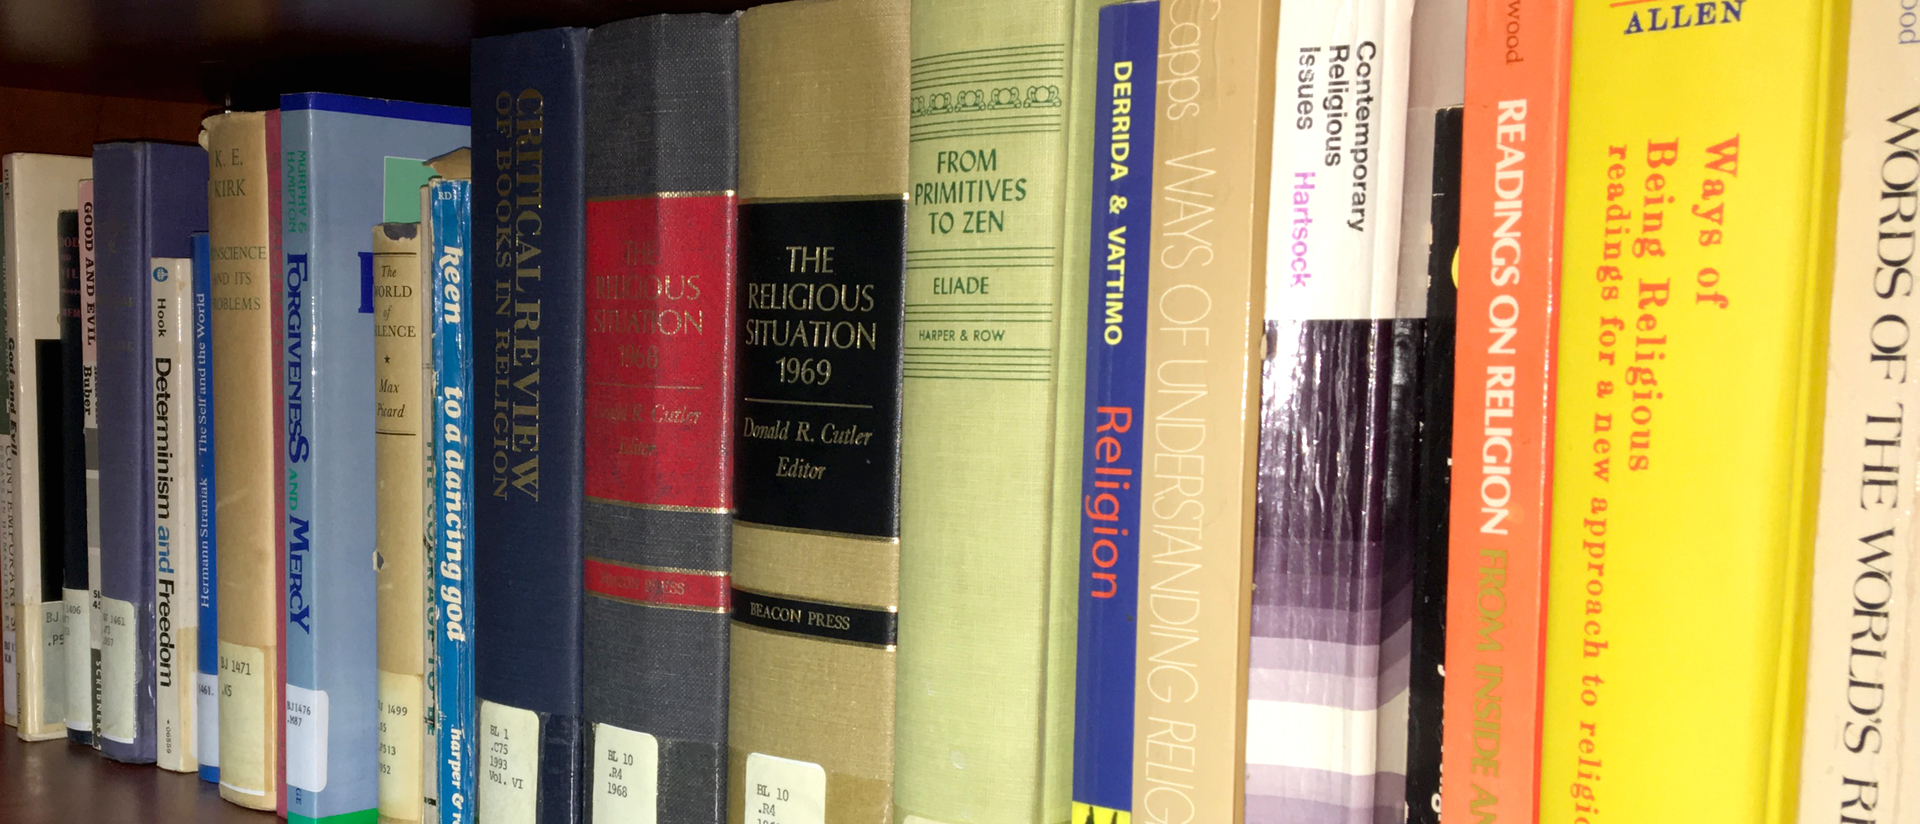 Books in philosophy and religious studies library